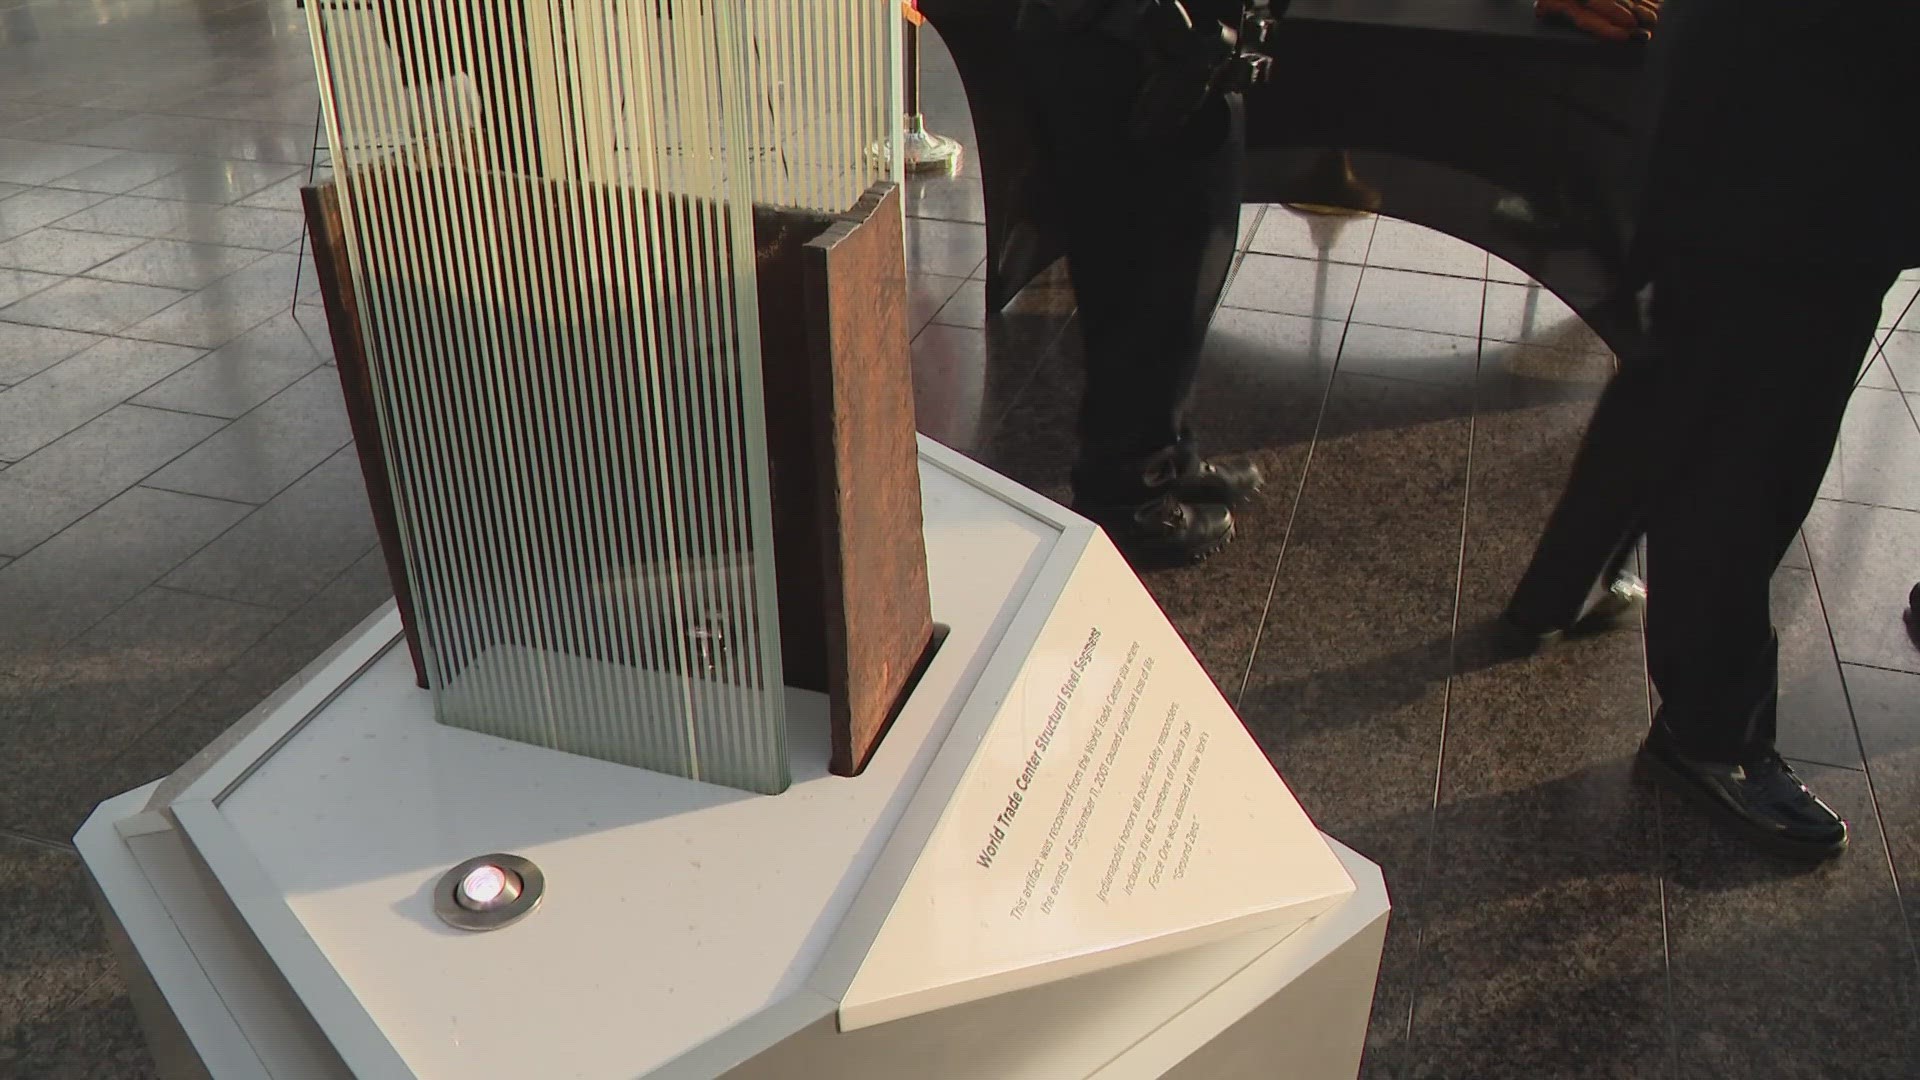 Monday's ceremony brought back memories as a piece of steel from the World Trade Center was on display.